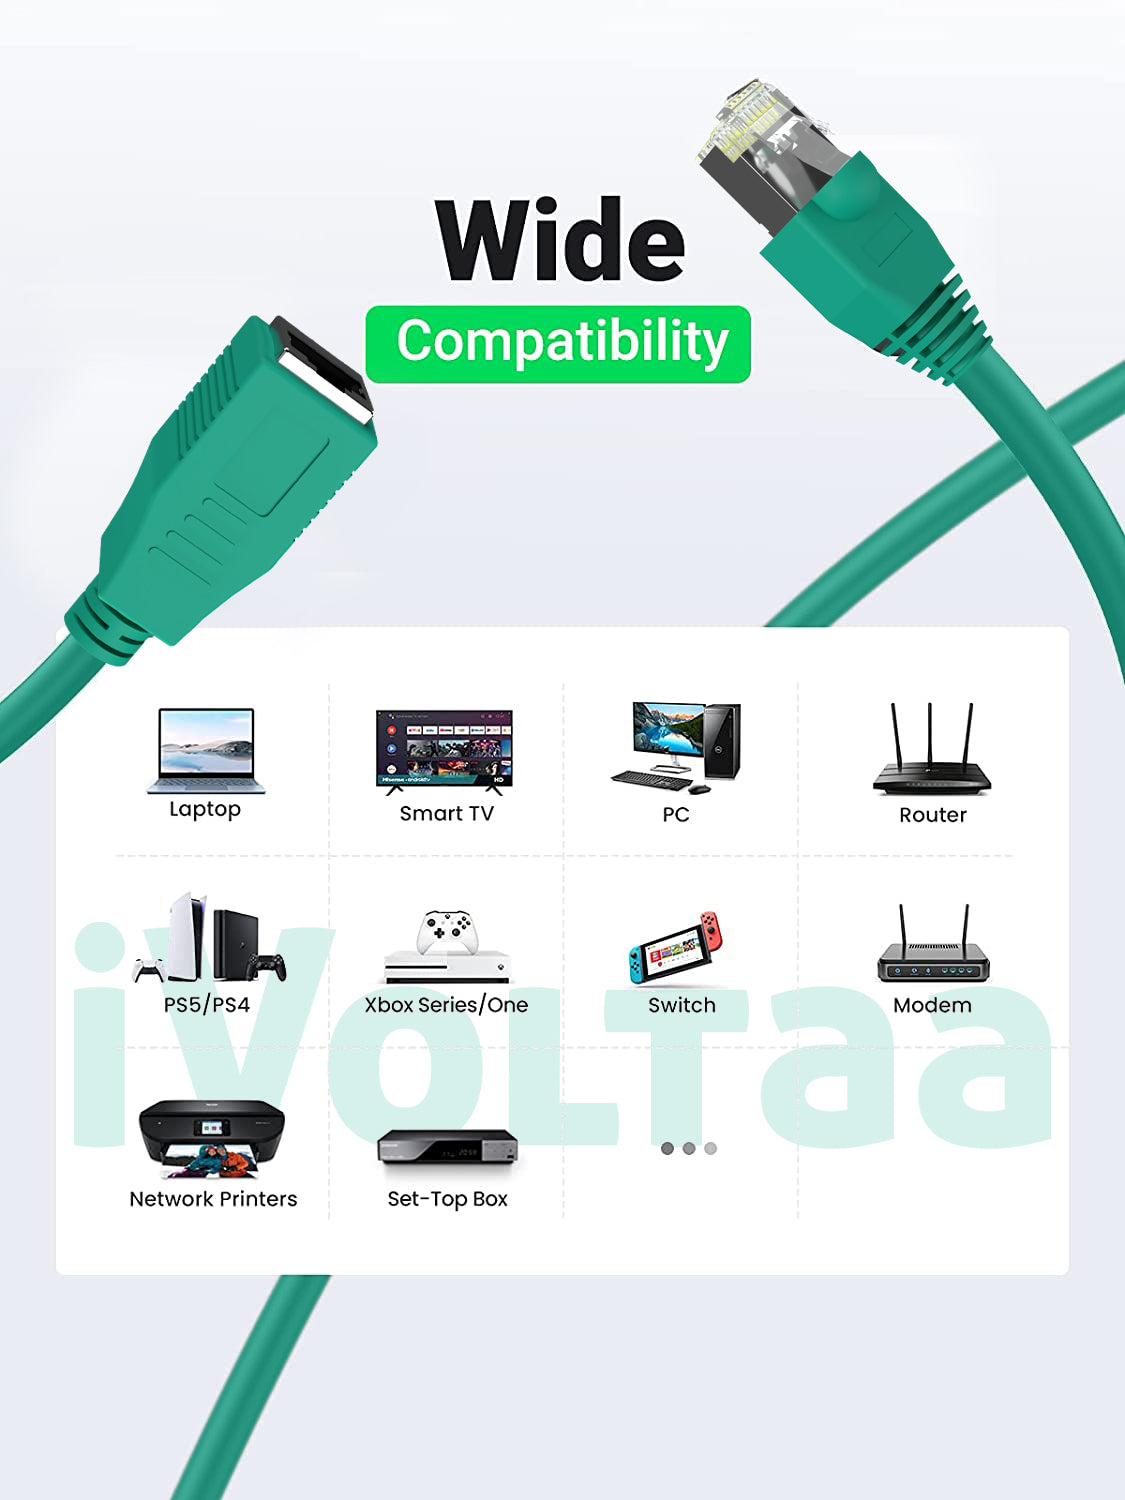 iVoltaa Ethernet Extension Cable CAT6A Male to Female Cable Dual Shielded (SF/UTP) Professional Series - 10Gigabit/Sec LAN Network/High Speed Internet Cable